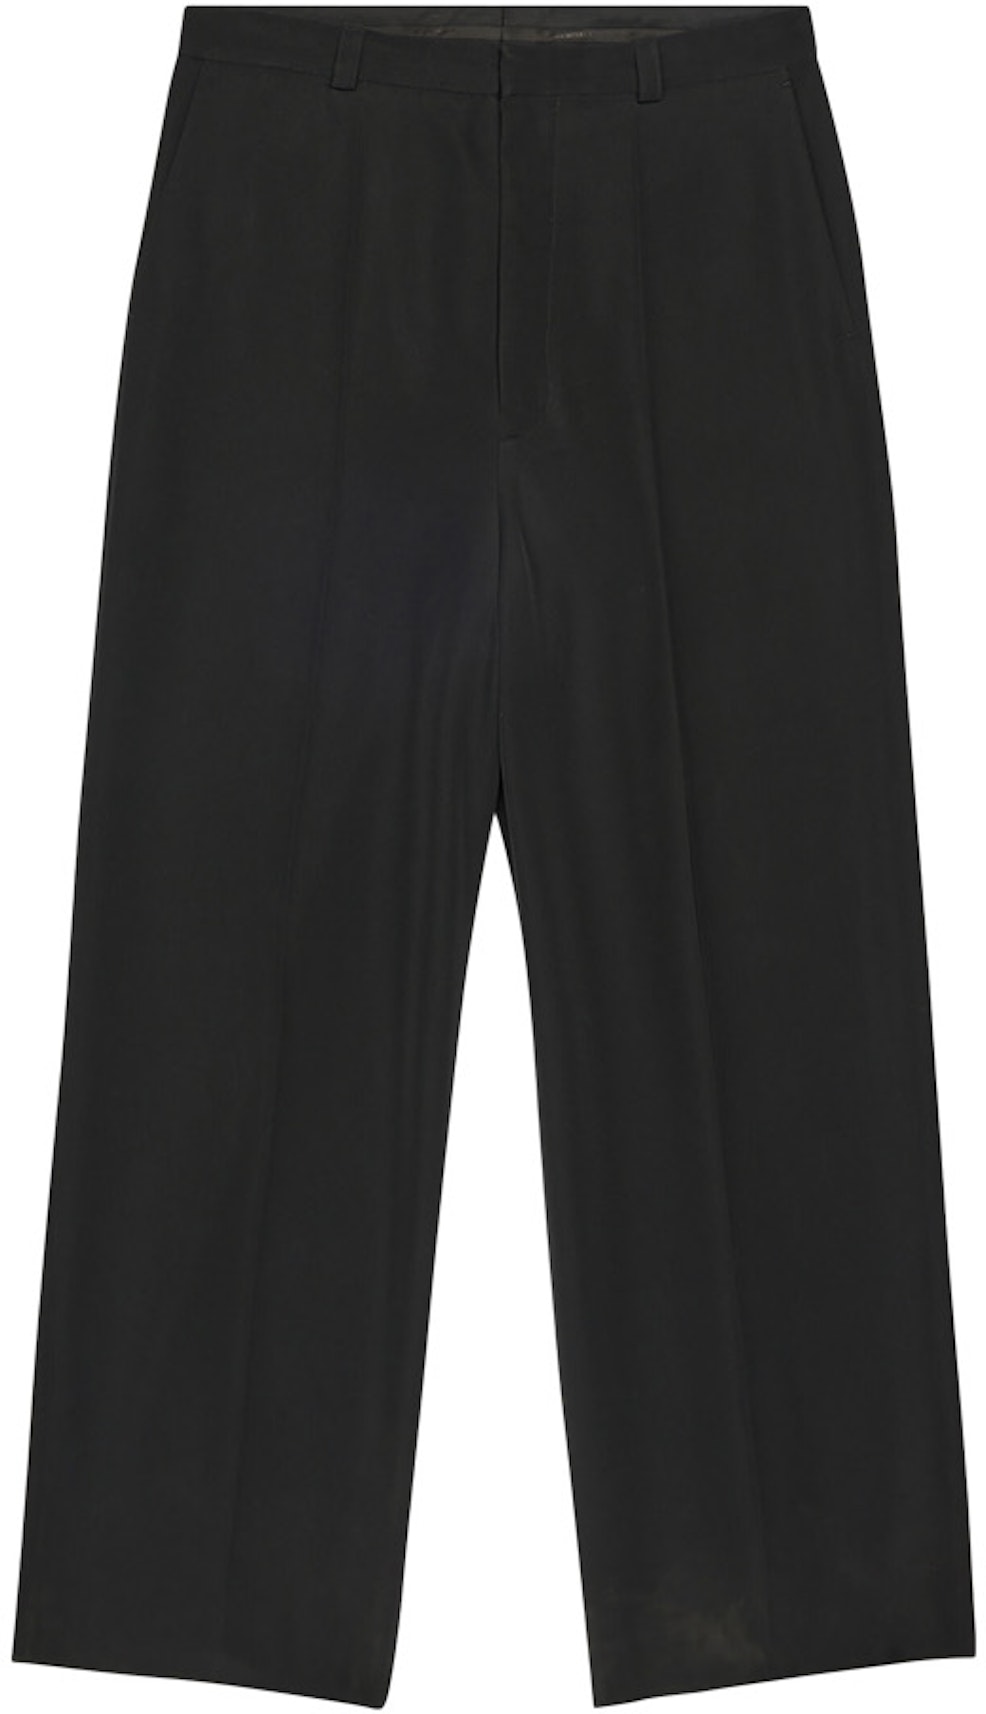 Great Barrier Reef Formand deadlock Balenciaga Technical Tailoring Twill Loose Pants Black - AW22 Men's - US